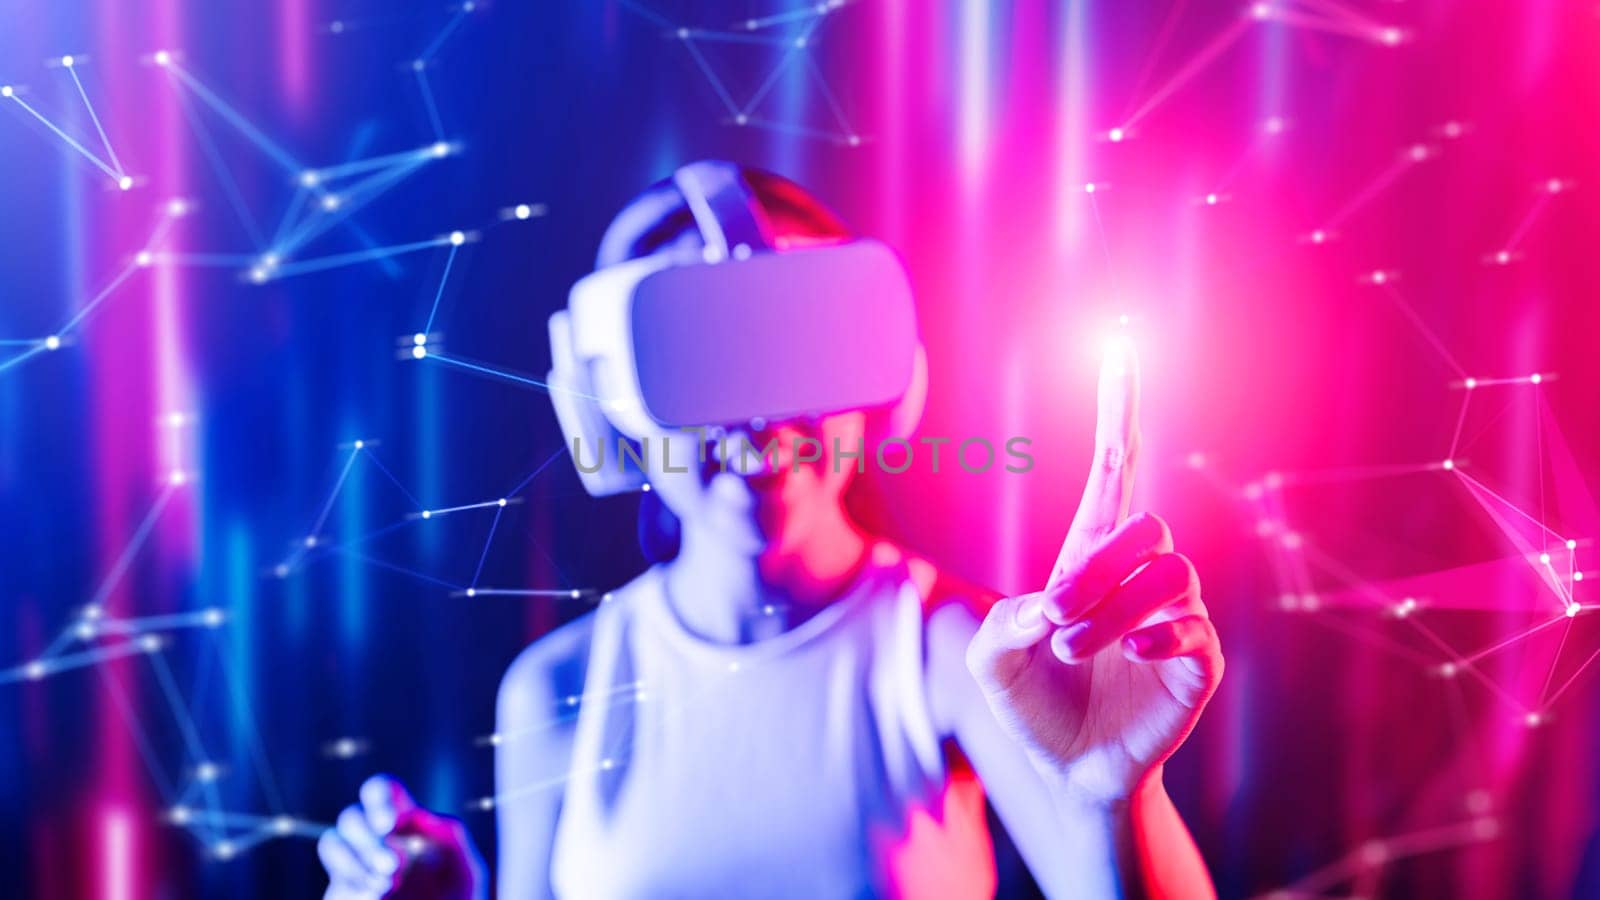 Smart female standing surrounded by neon light wearing VR headset connecting metaverse, future cyberspace community technology. Elegant woman using her finger touching virtual object. Hallucination.